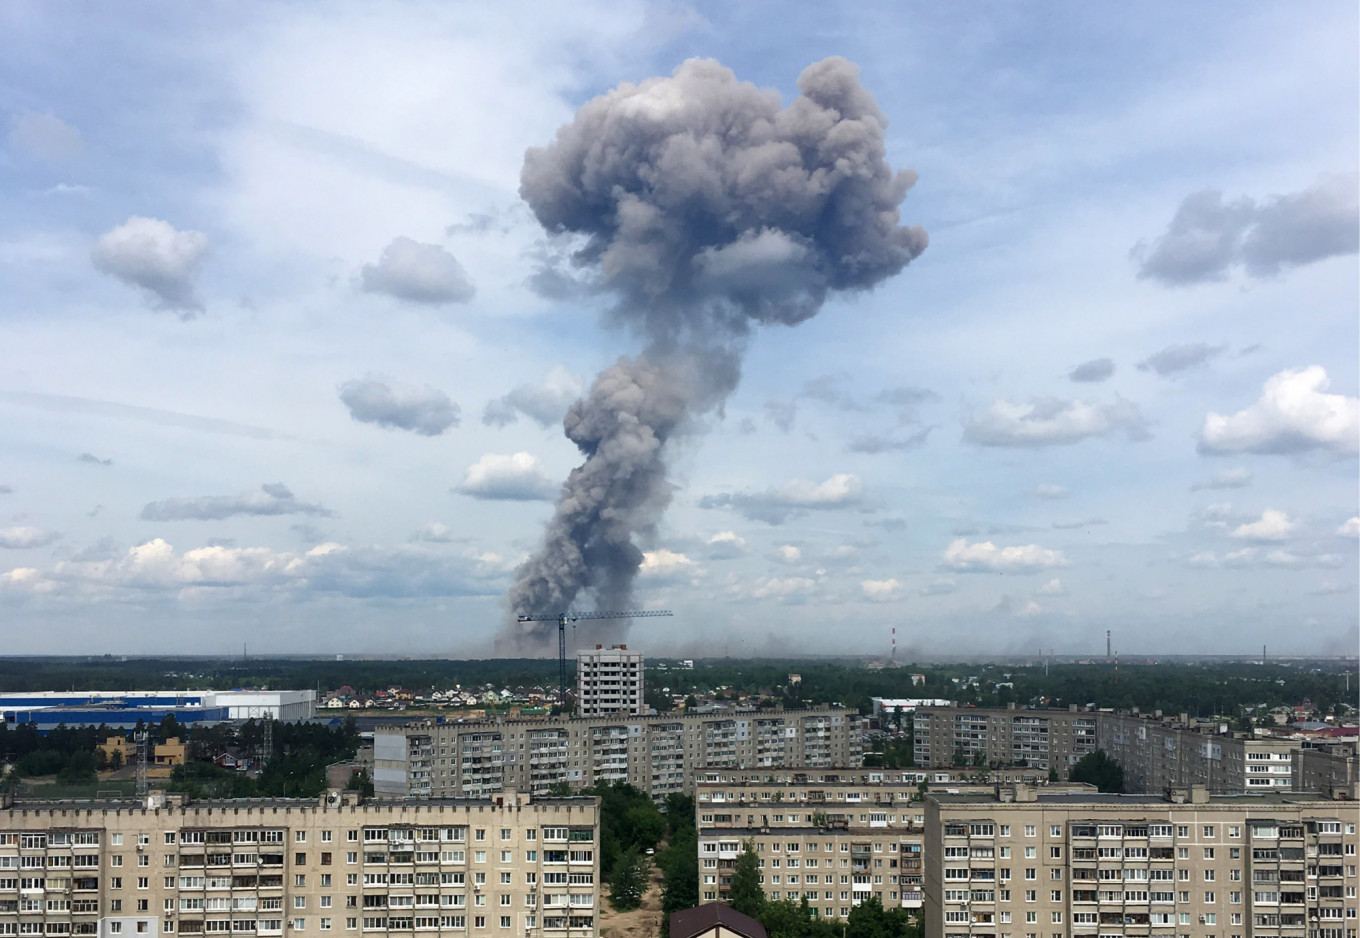 Two People Missing After Blasts at Russian Military Plant, 22 Injured